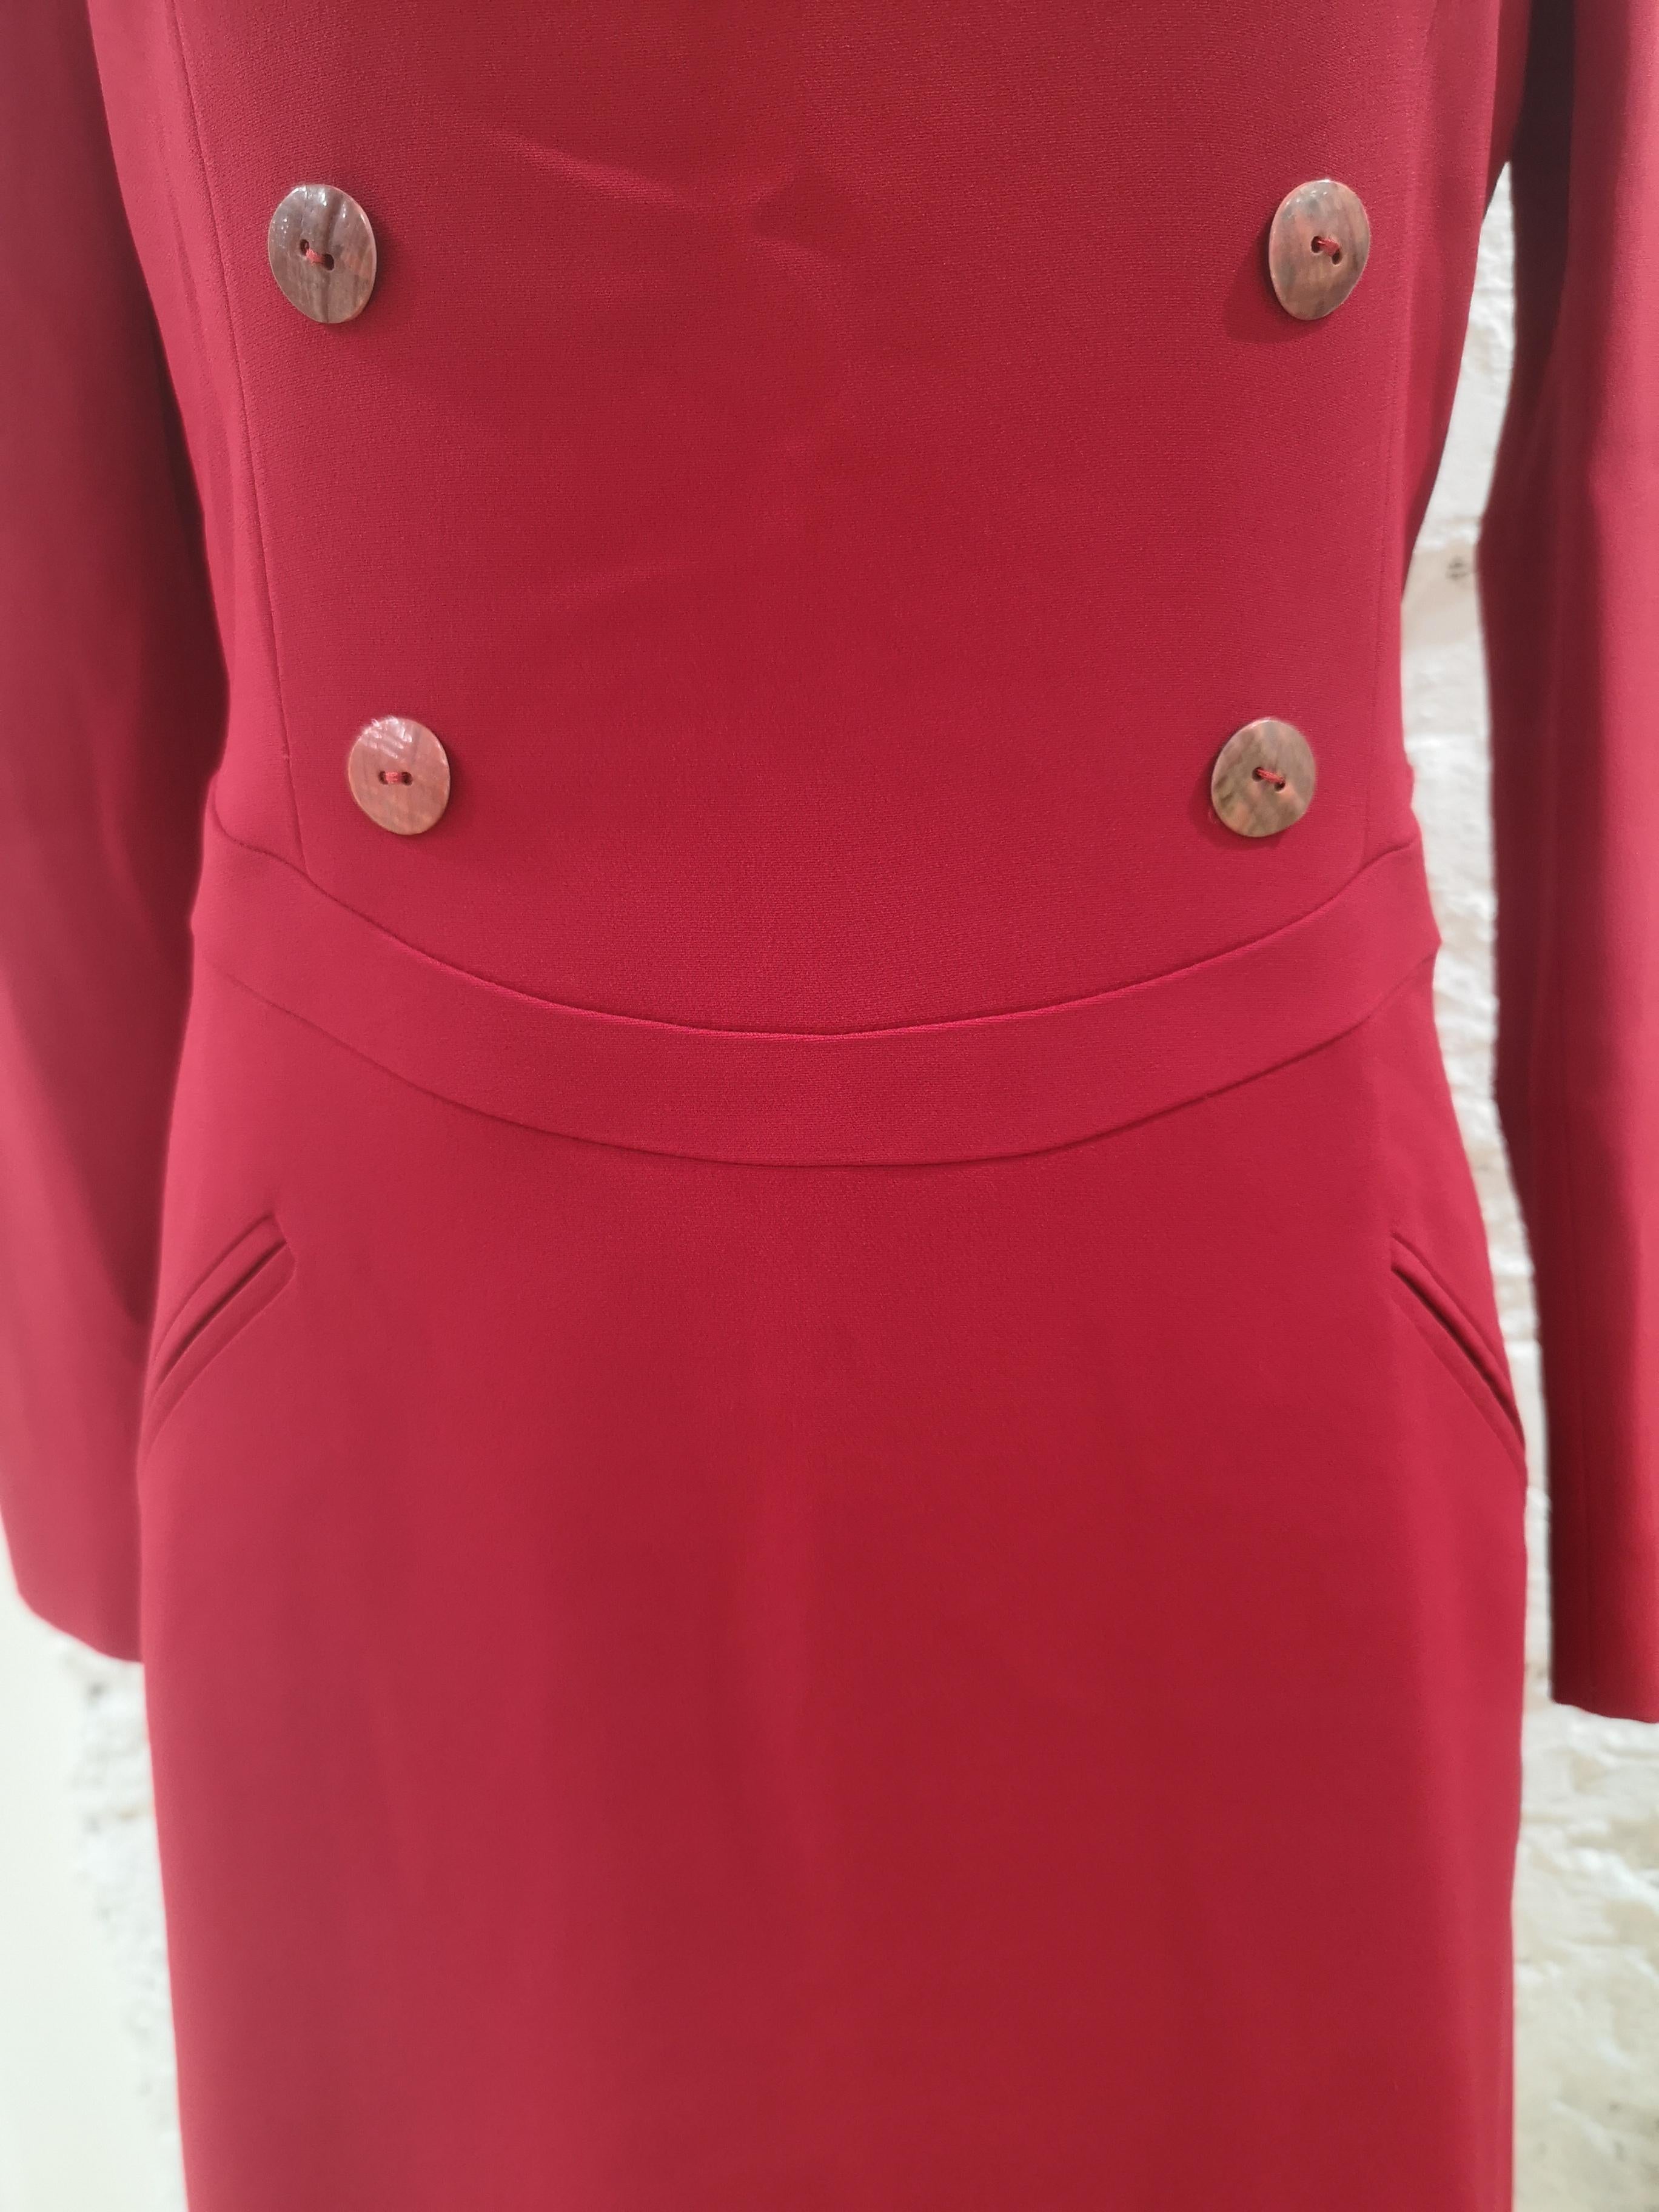 Moschino Couture red dress
totally made in italy in size 42